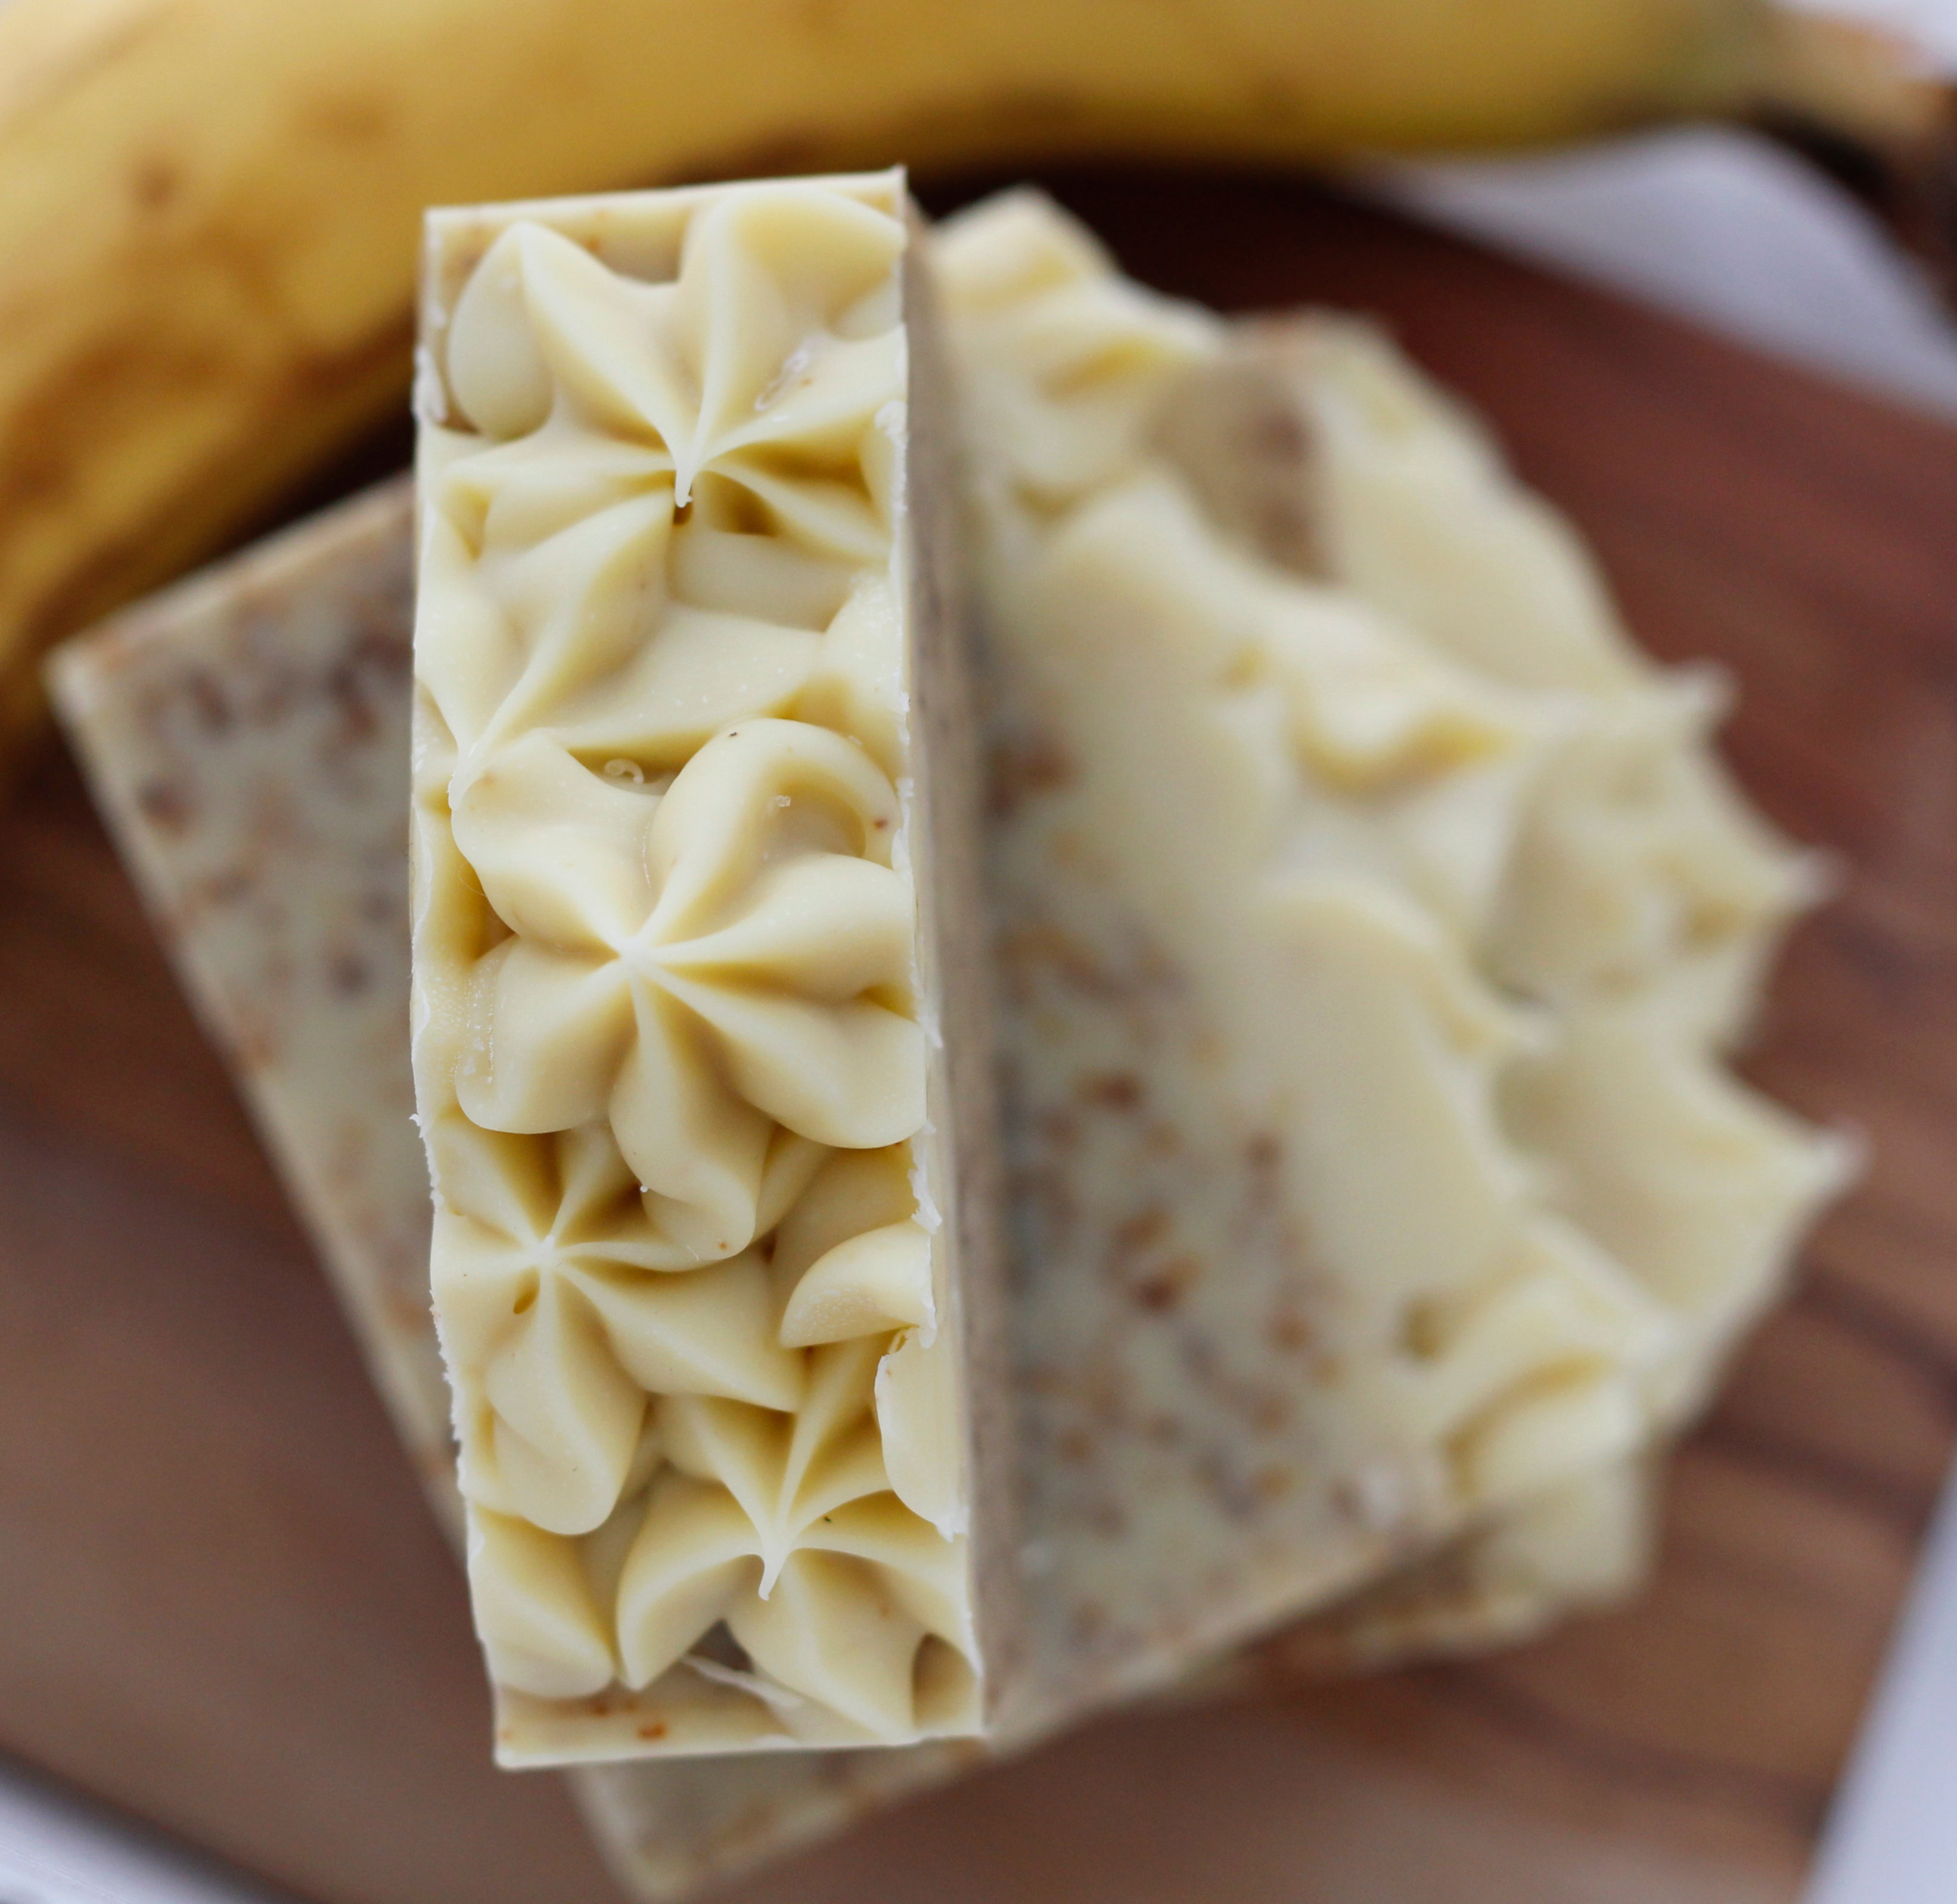 piped top on banana soap recipe